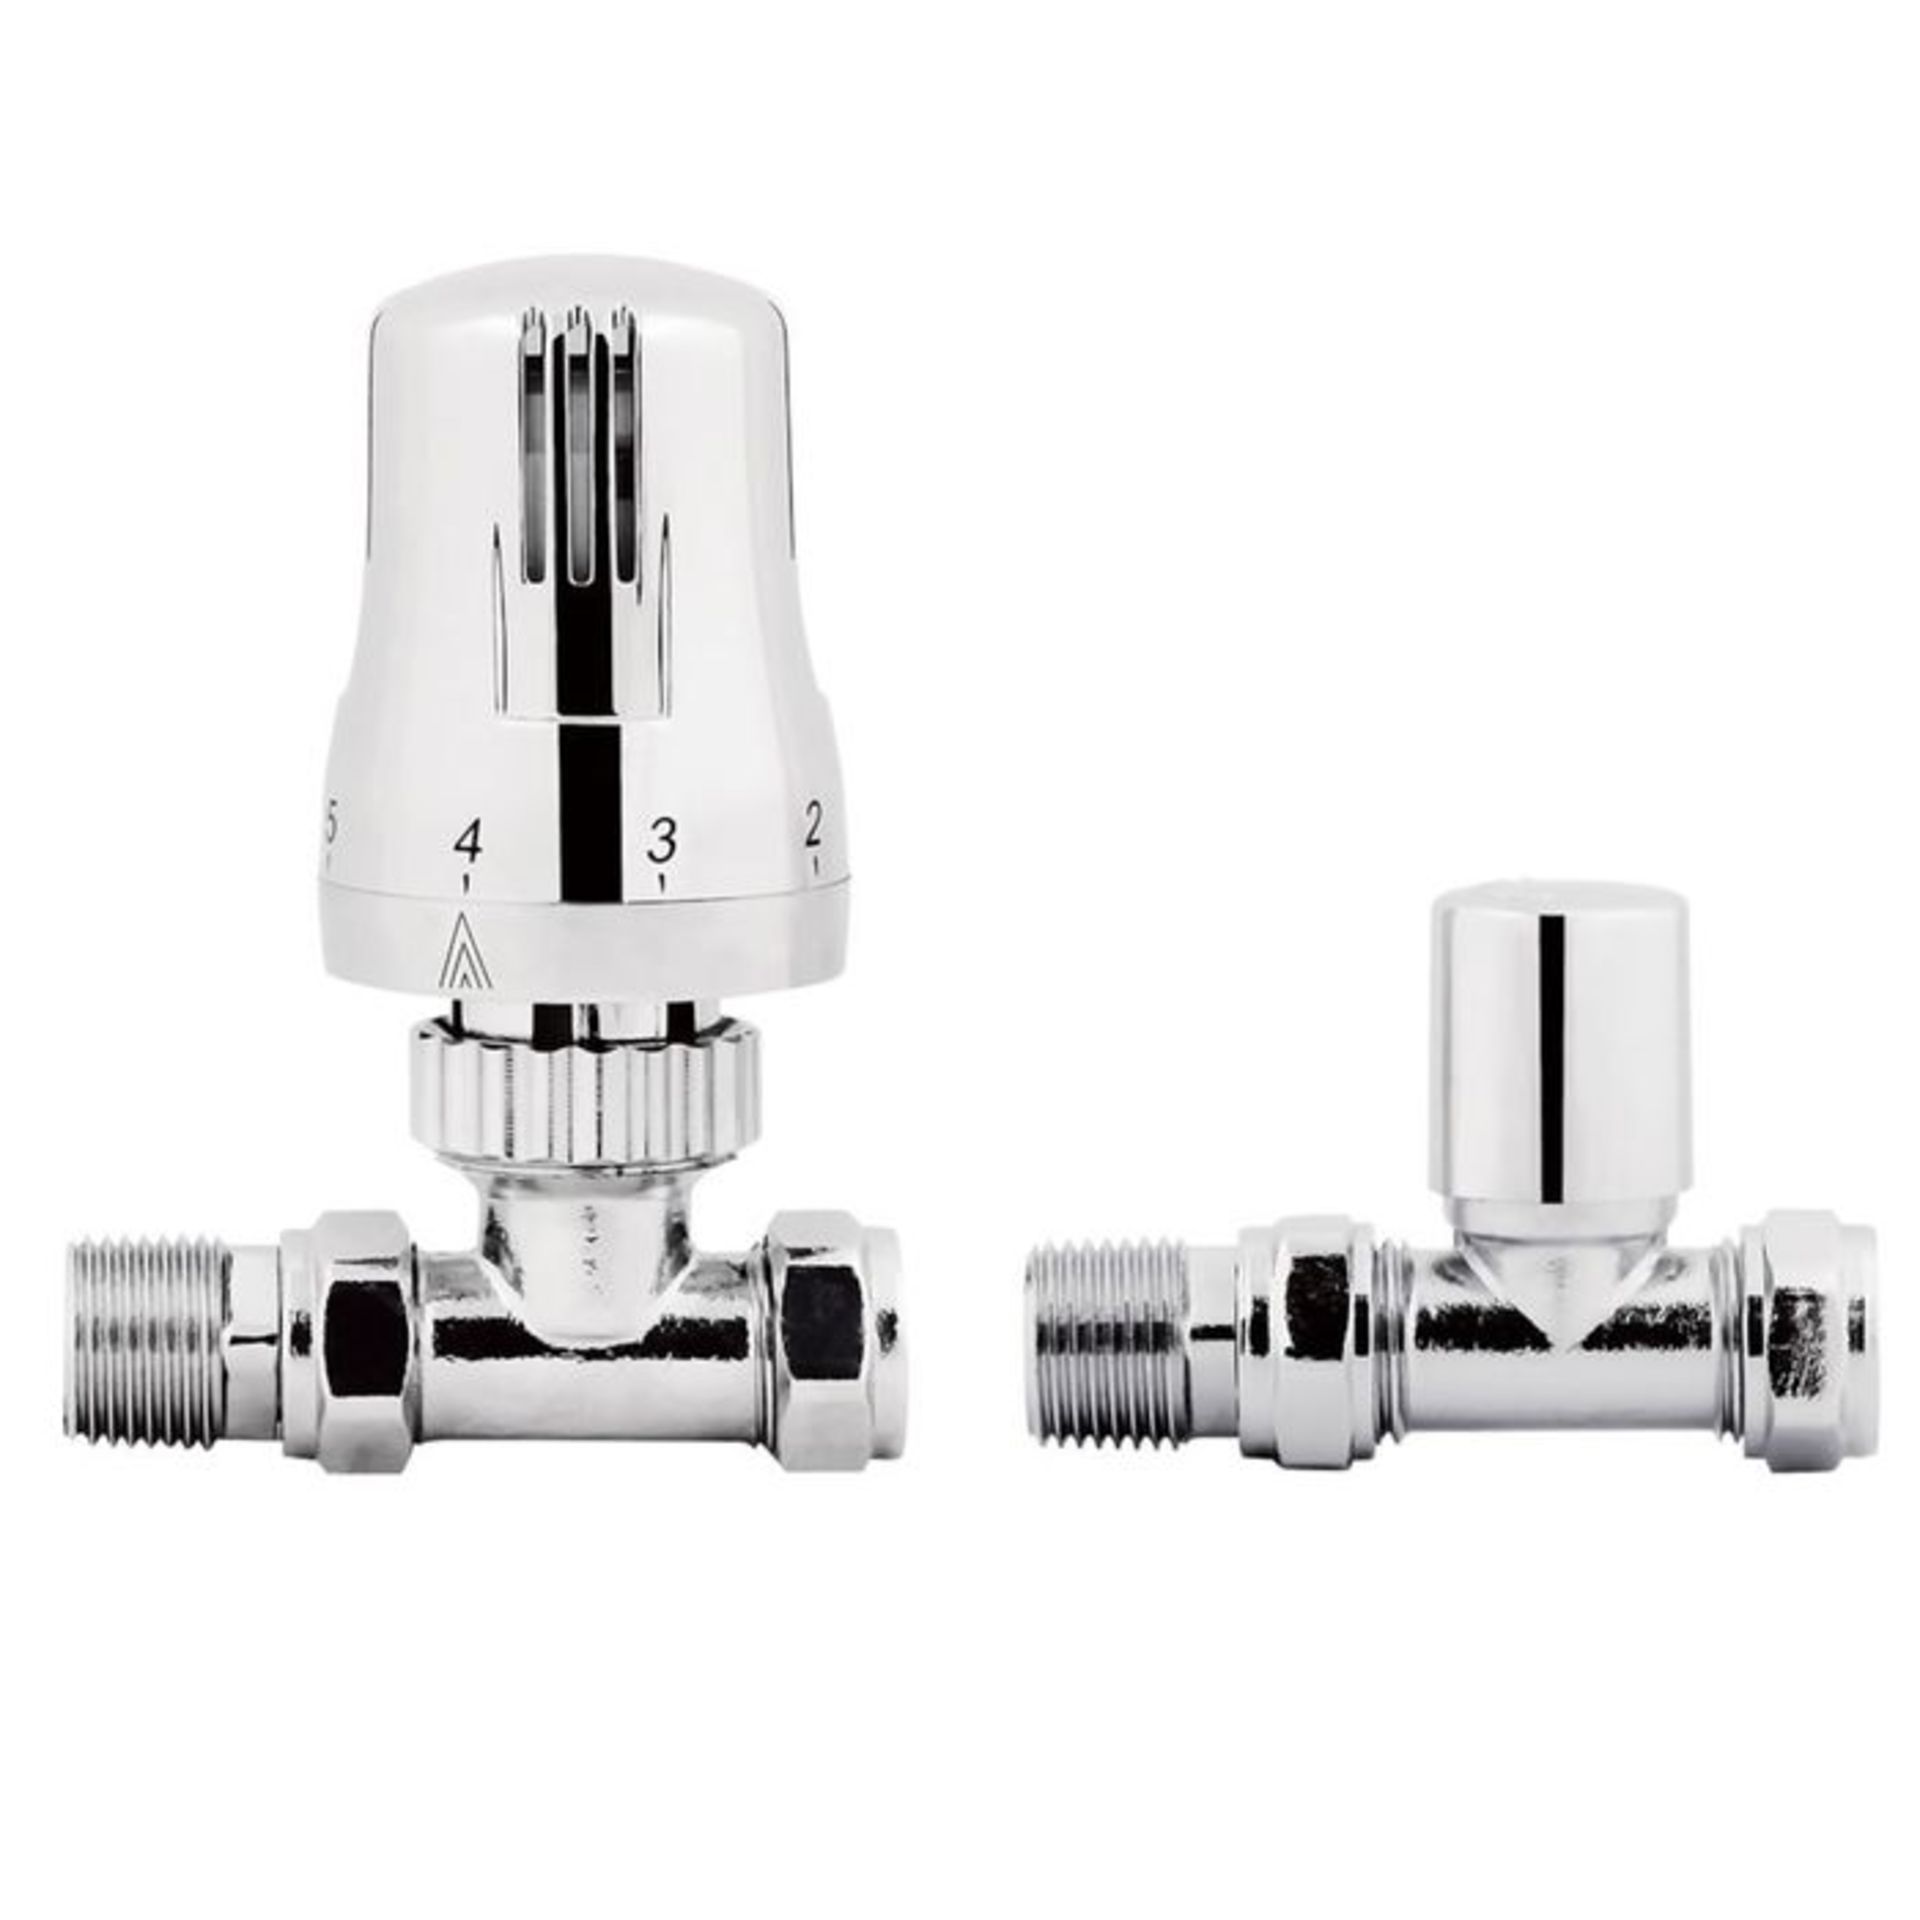 (ZA139) 15mm Standard Connection Thermostatic Straight Chrome Radiator Valves Chrome Plated Solid